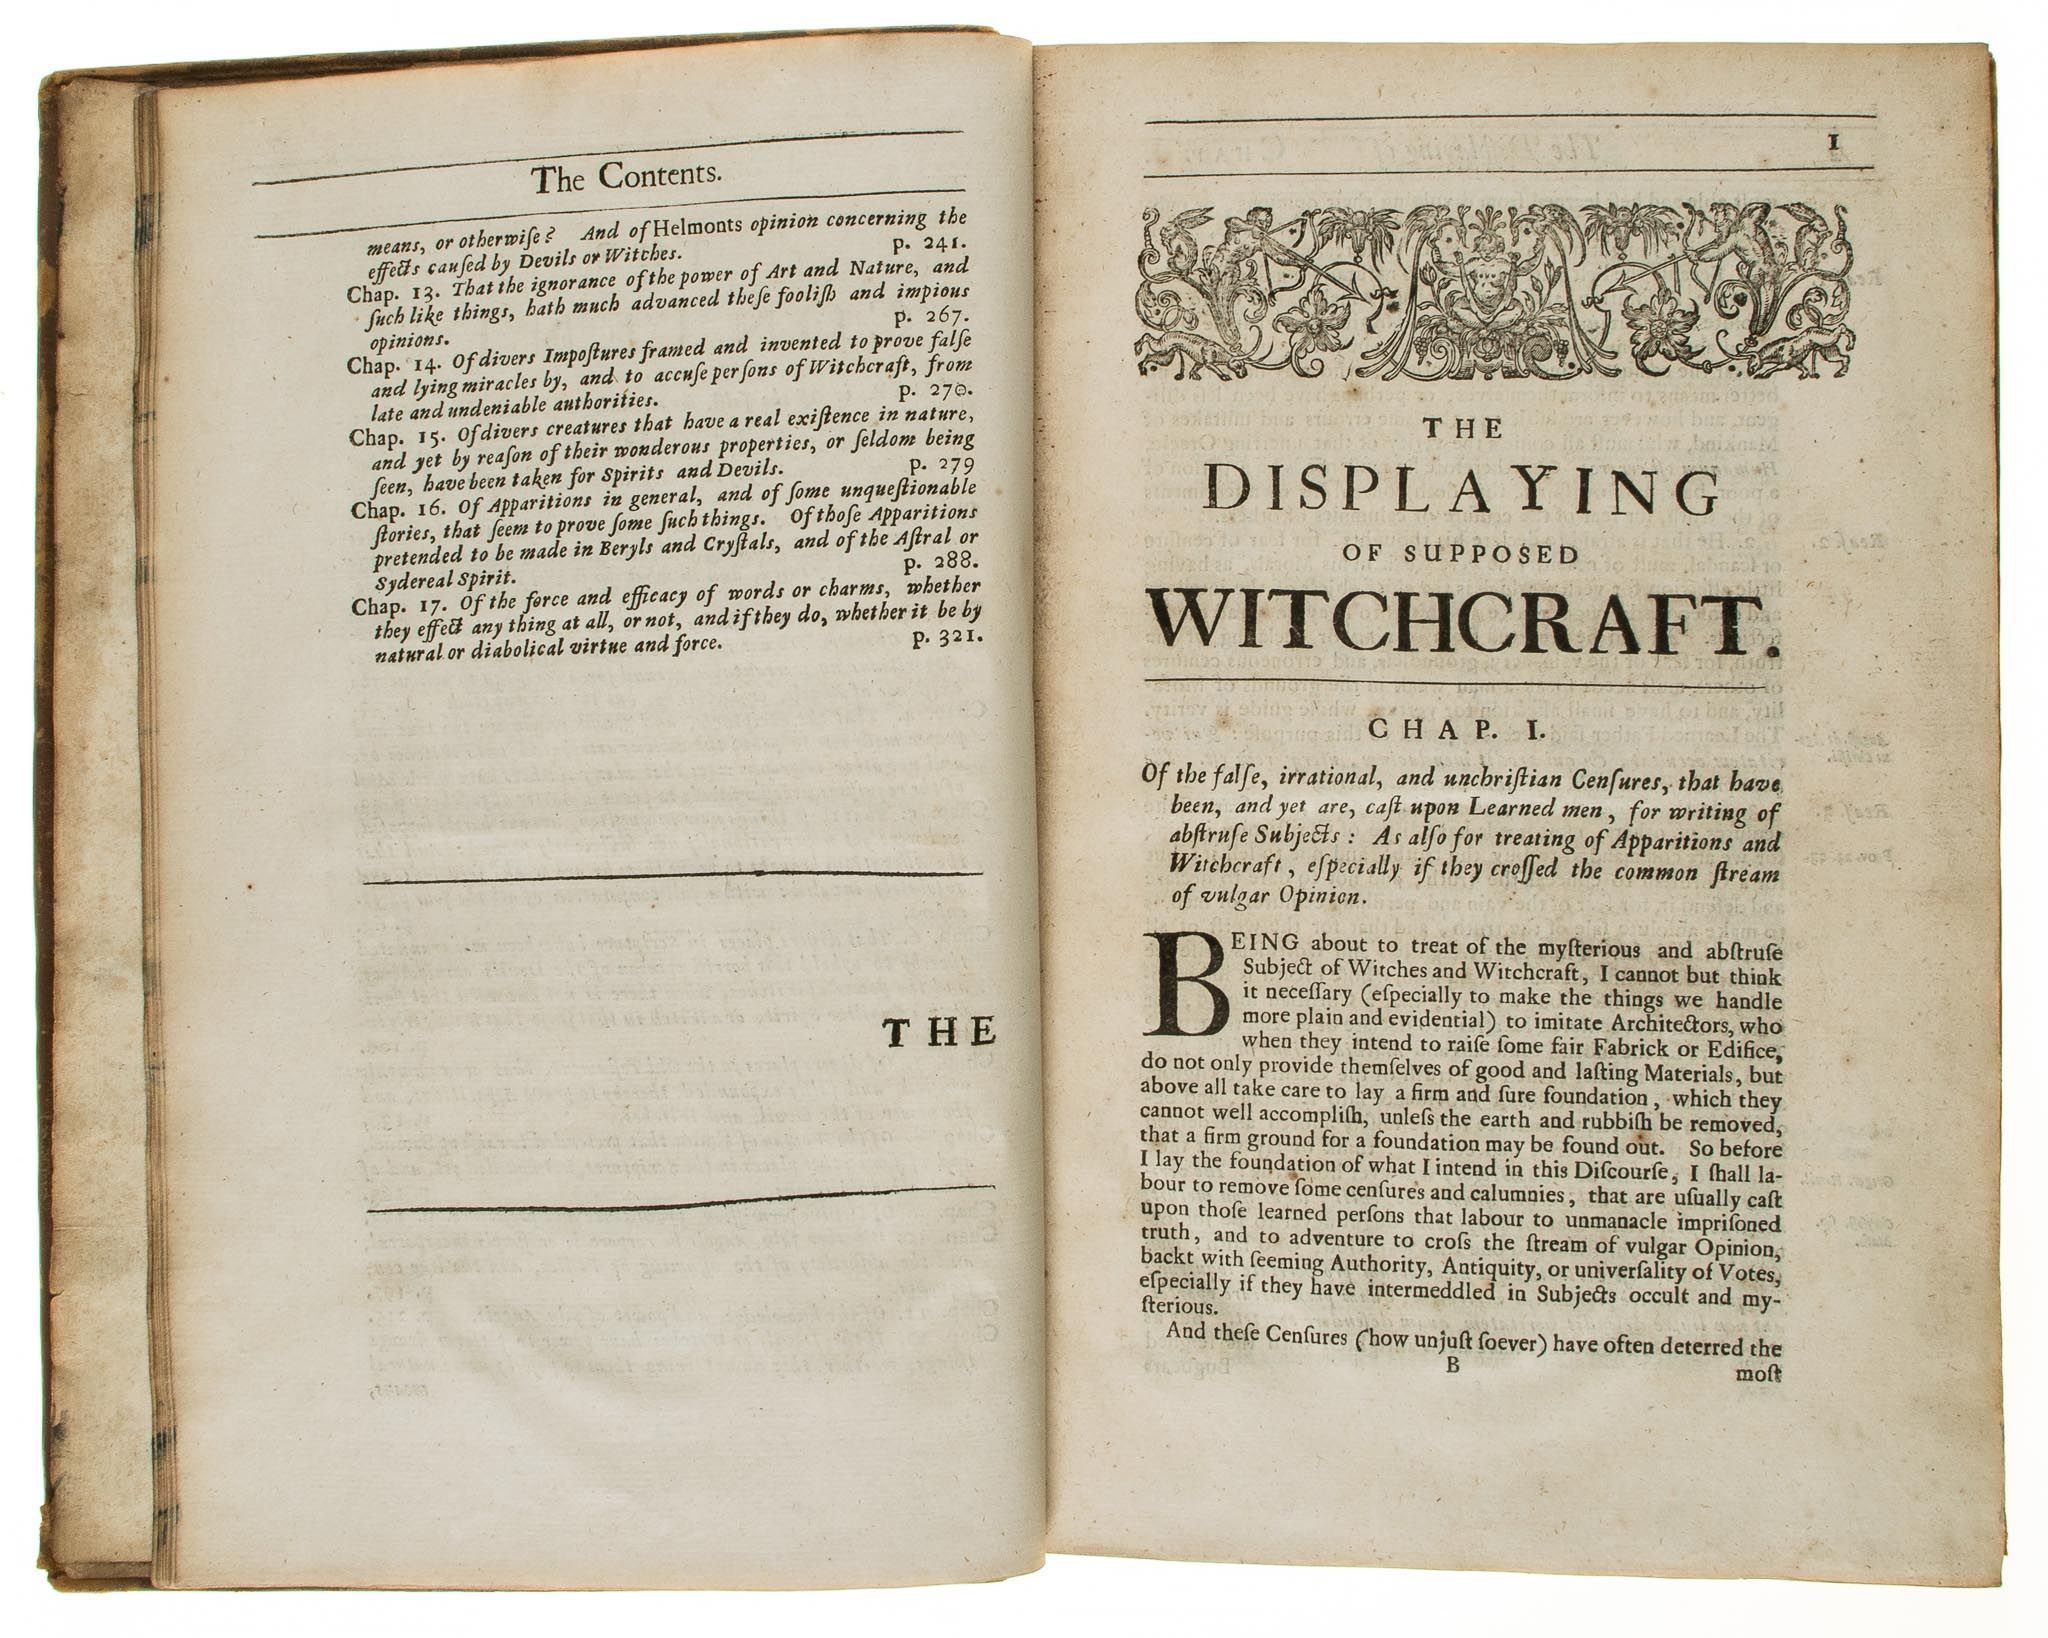 Webster (John) - The Displaying of Supposed Witchcraft,  first edition  ,   imprimatur leaf,